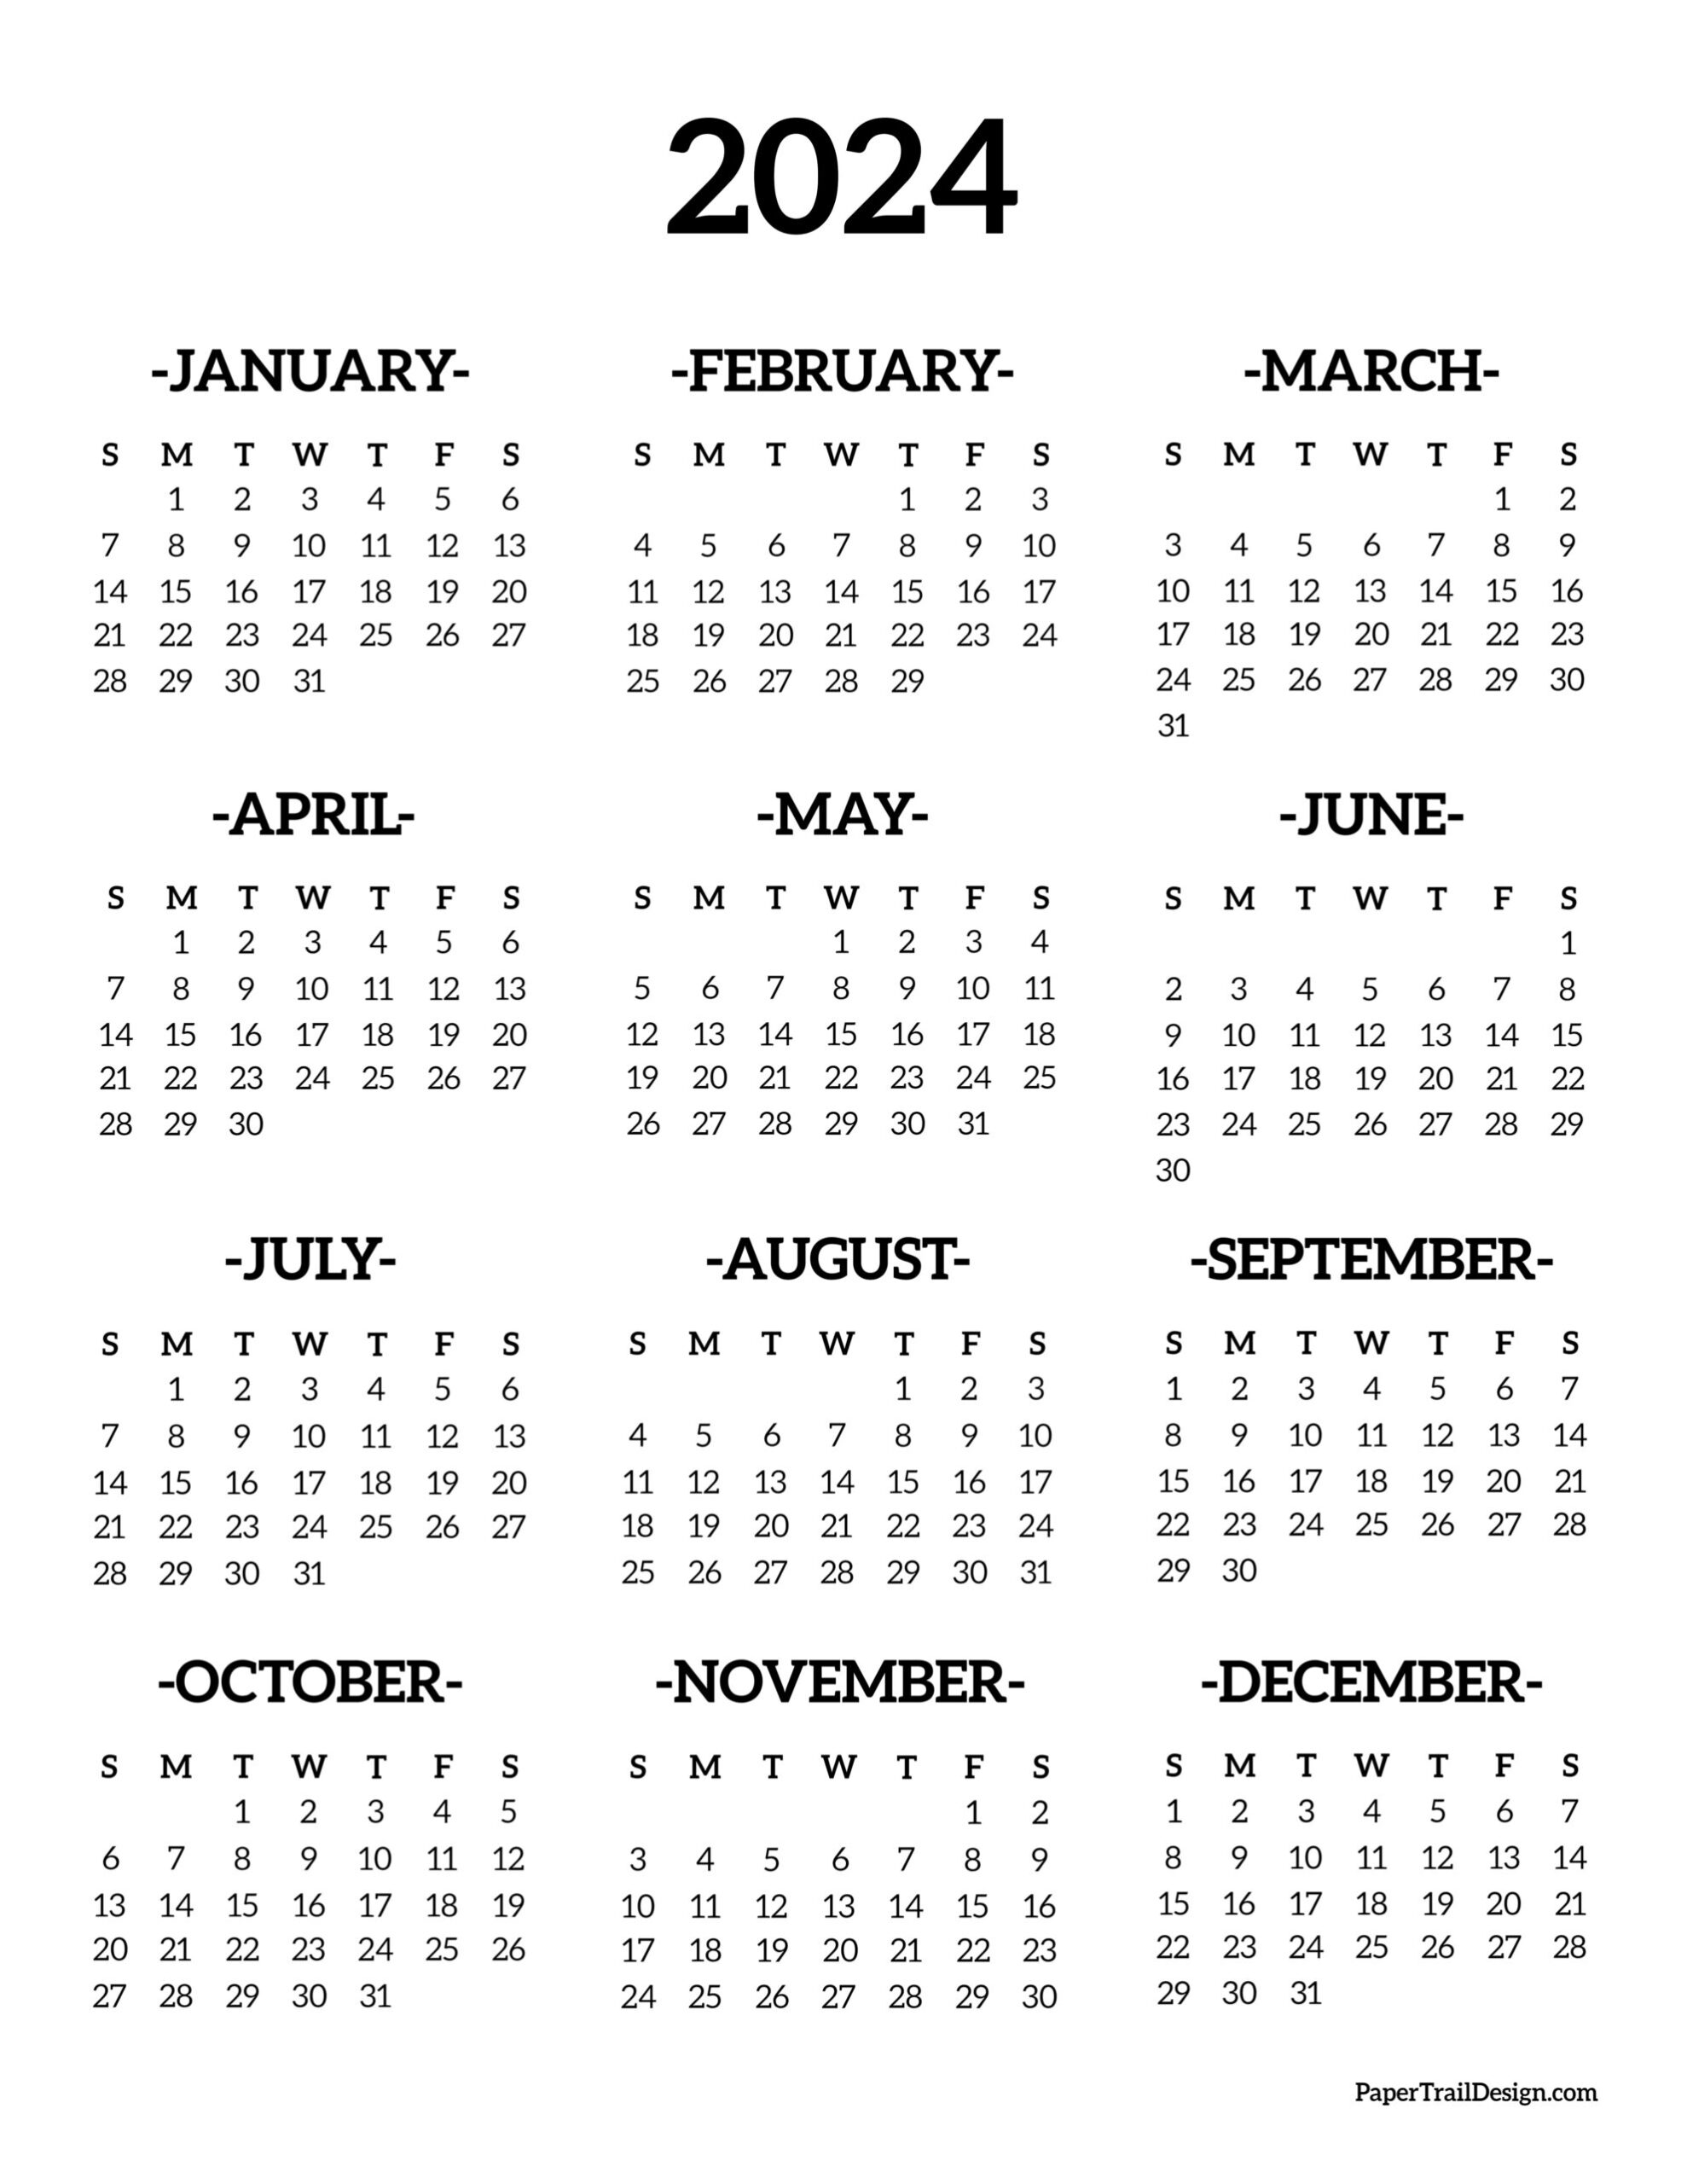 Calendar 2024 Printable One Page - Paper Trail Design for Free Printable 2024 Calendar Pages